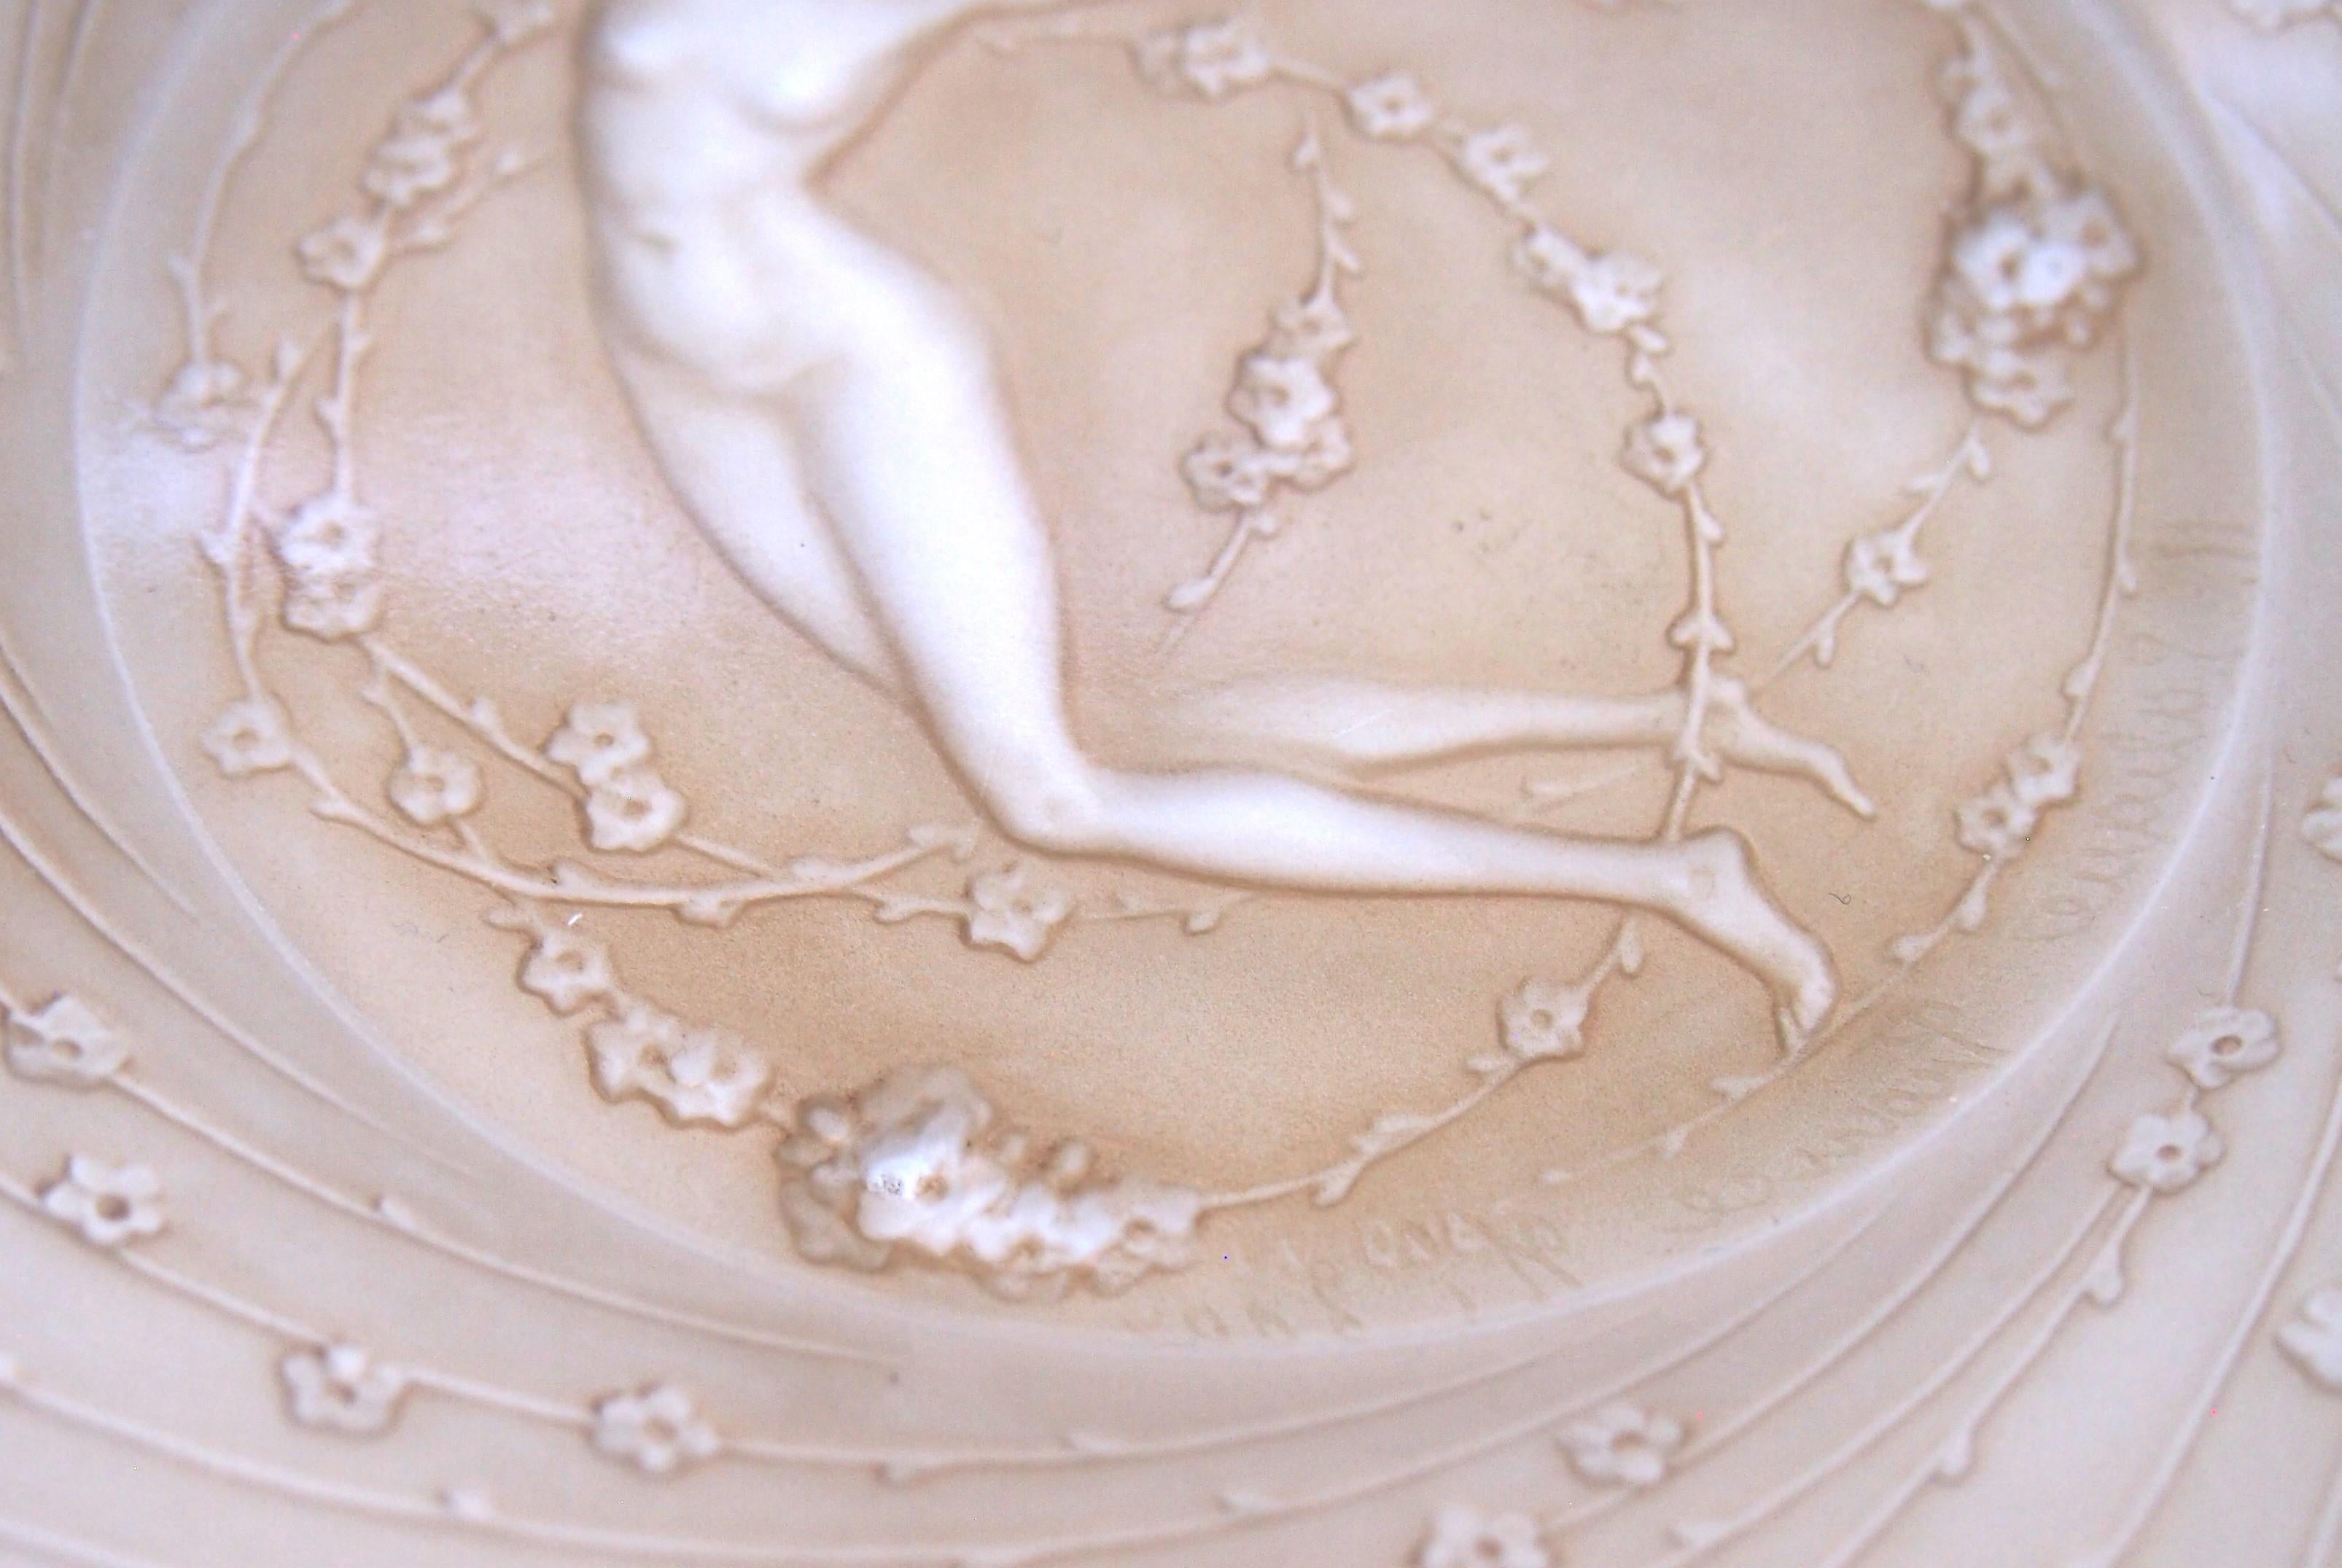 An iconic and rare Rene Lalique 'Une Figurine et Fleur' small pate with original sepia staining -one of his earliest designed plates and it shows one of his most iconic images; a beautiful naked lady with a 1920s haircut, dancing amongst long fronds